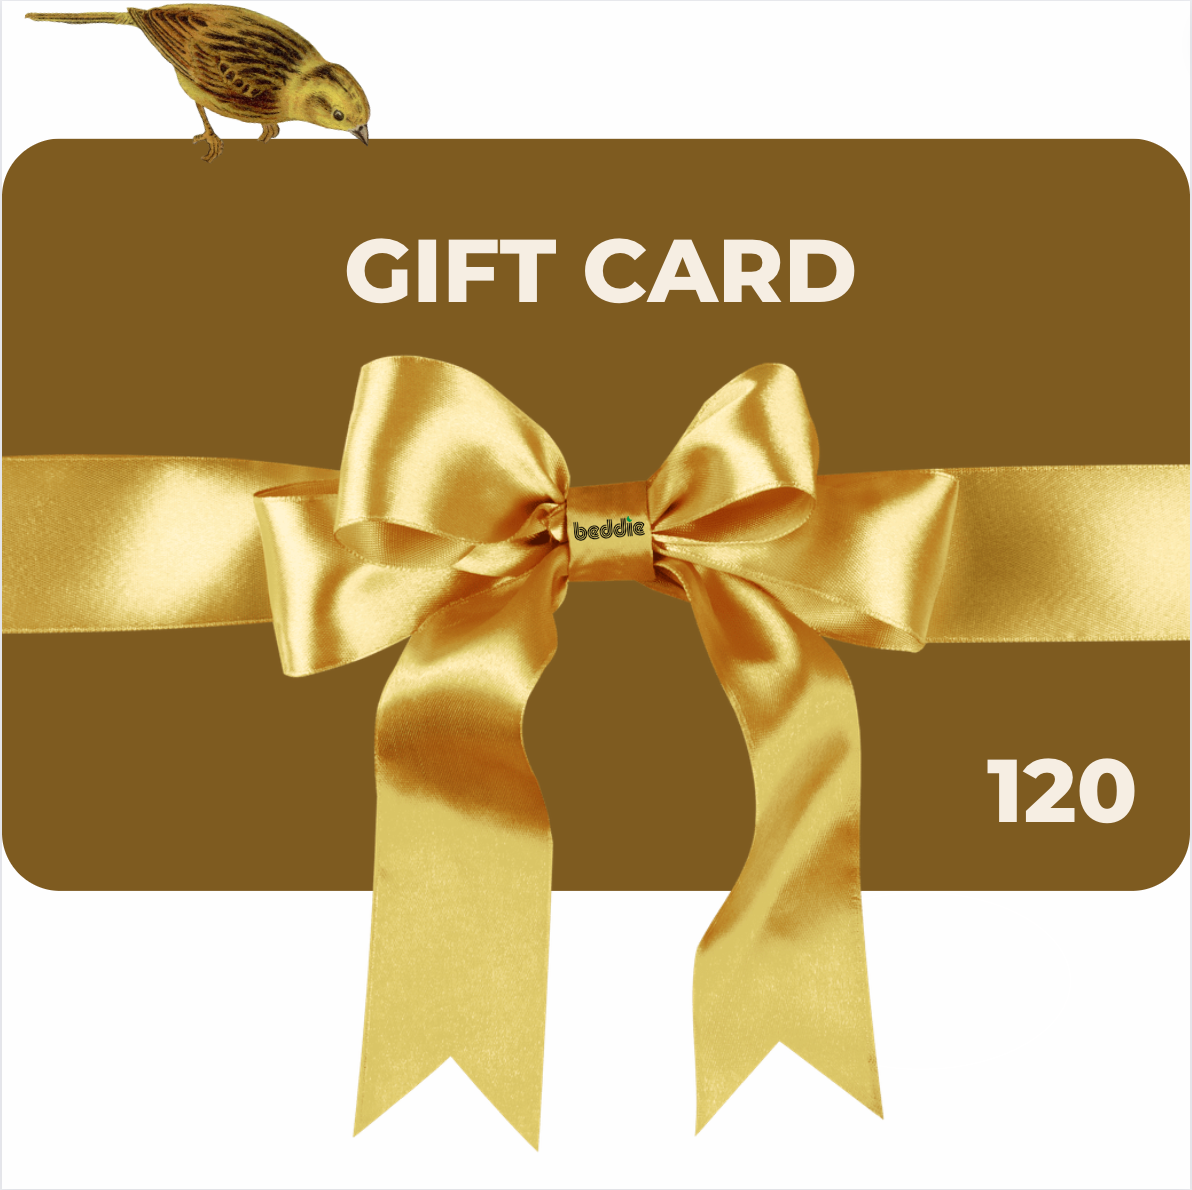 Beddie Gift Card 4120. Give the gift of sleep!